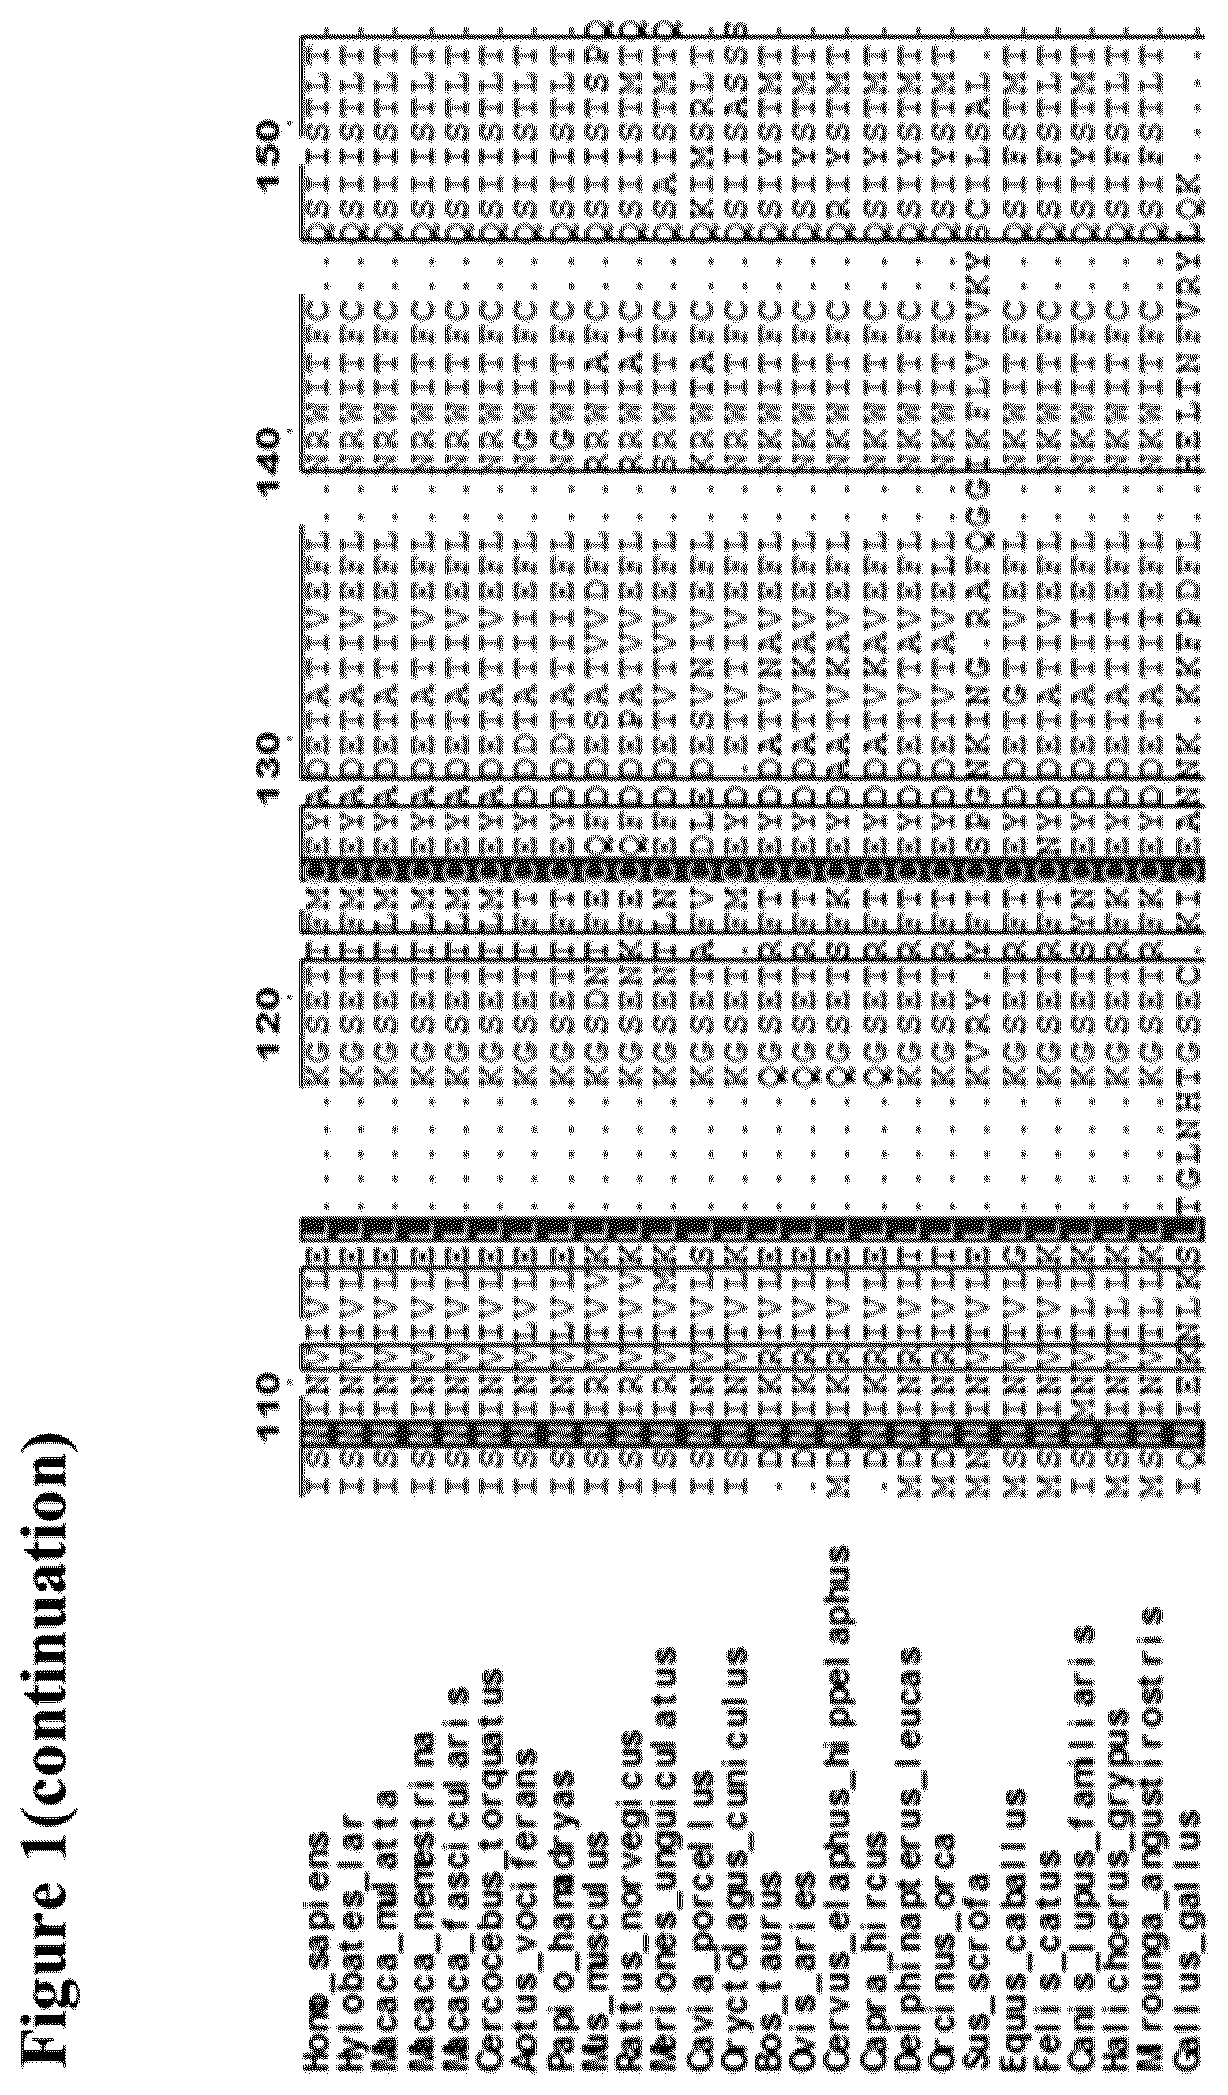 Interleukin-2 Variants with Modified Biological Activity